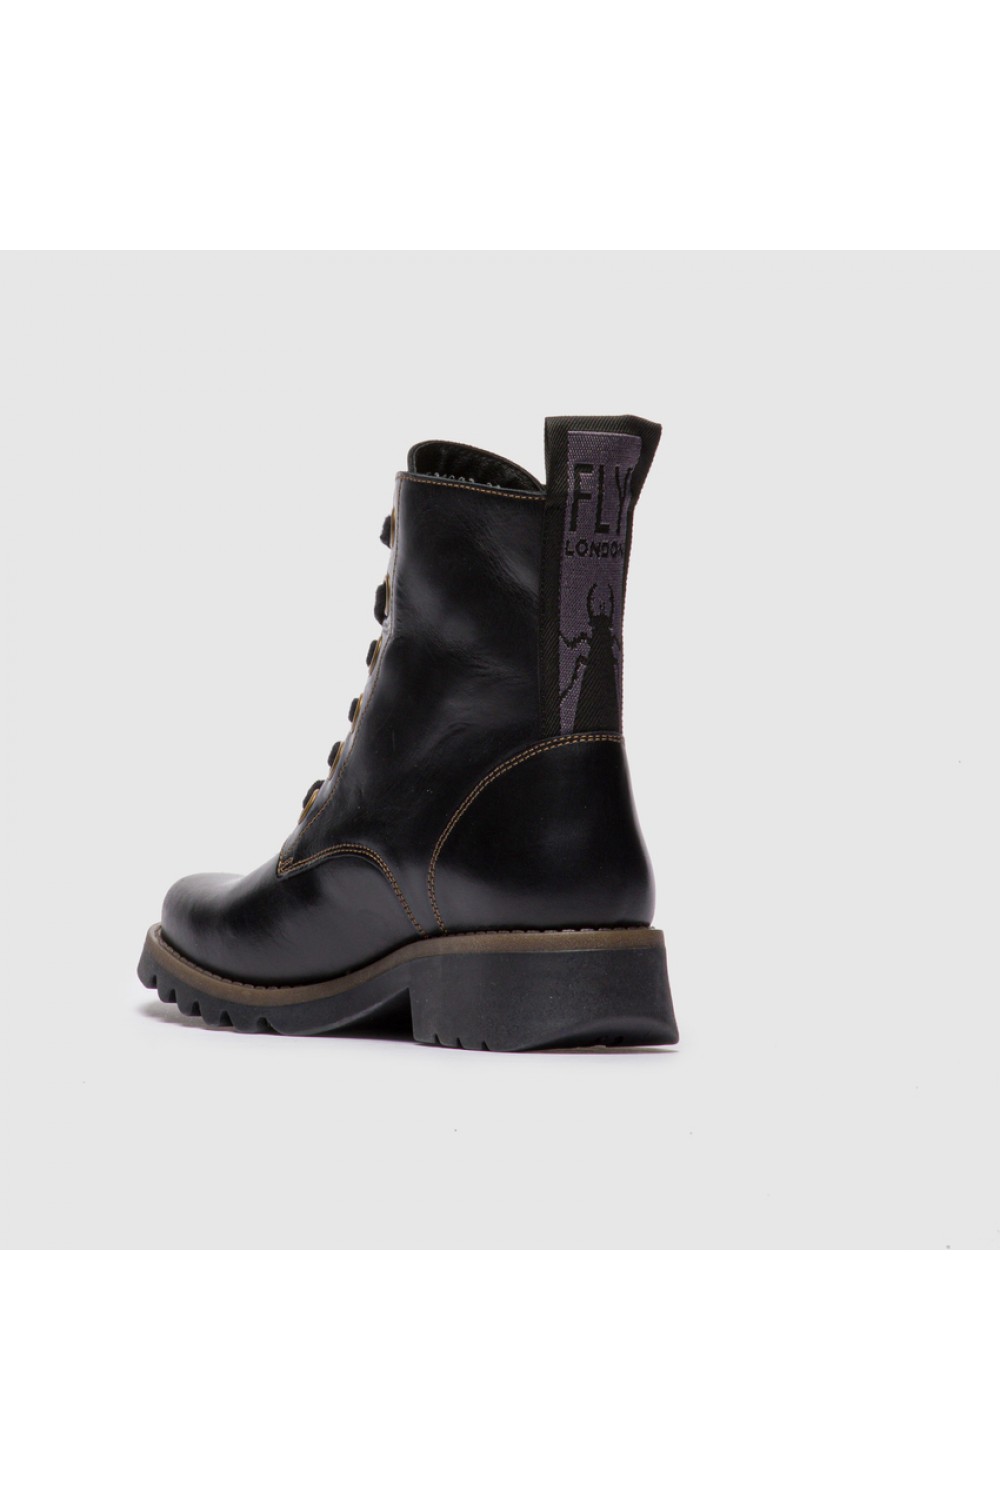 FLY LONDON Ragi539 Military Style Lace Up Boot Black